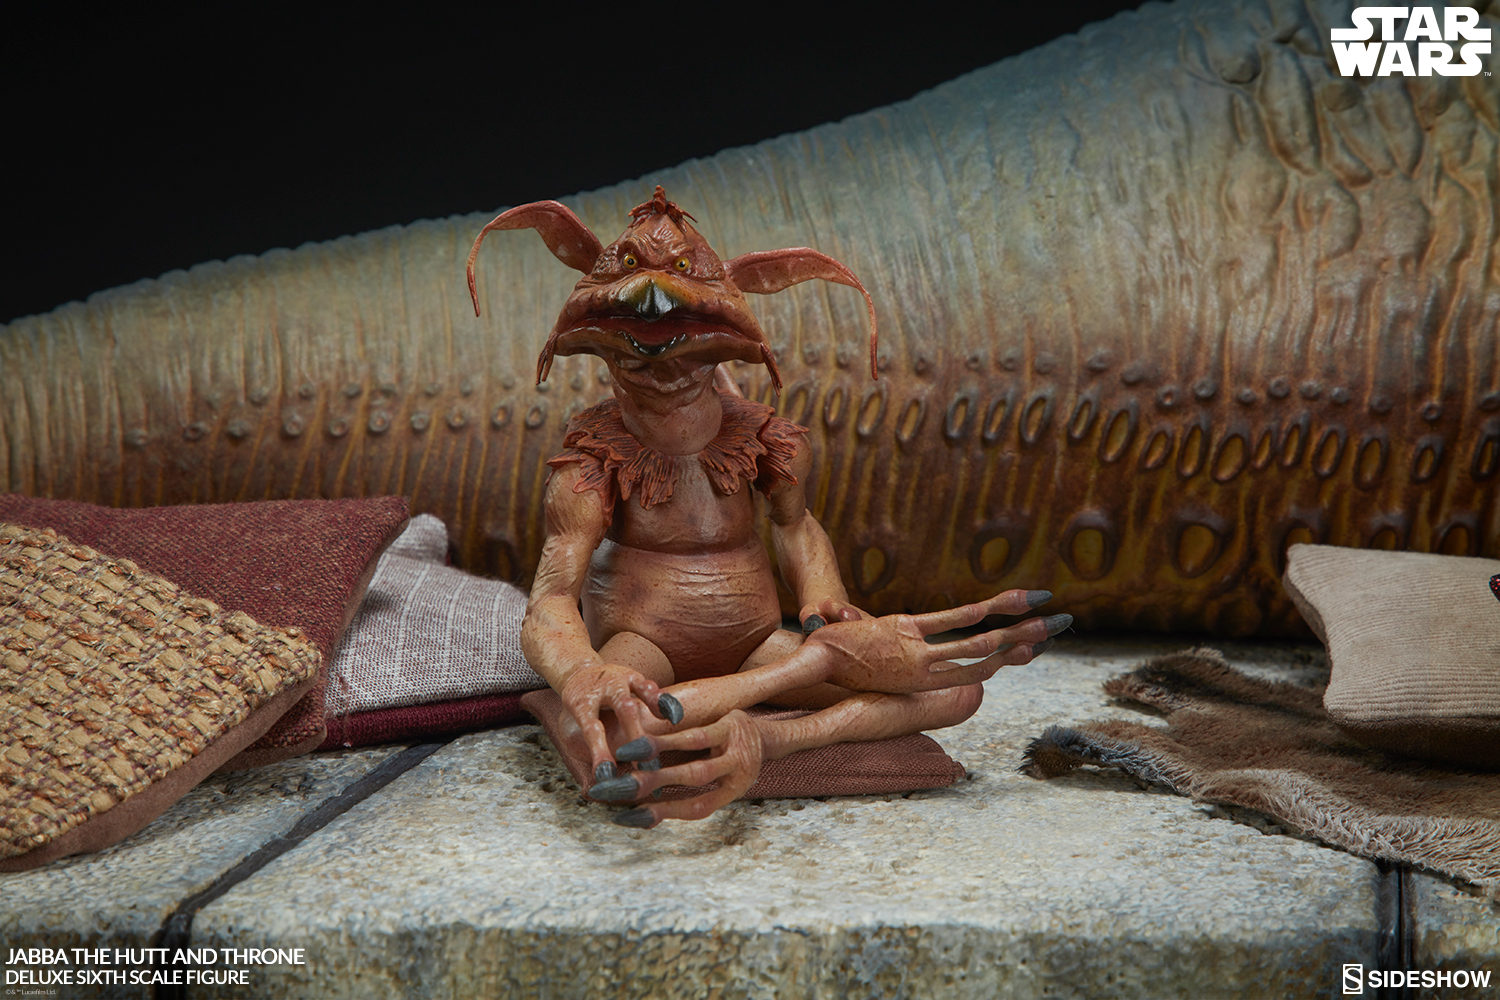 star-wars-jabba-the-hutt-and-throne-deluxe-sixth-scale-figure-sideshow-100410-25